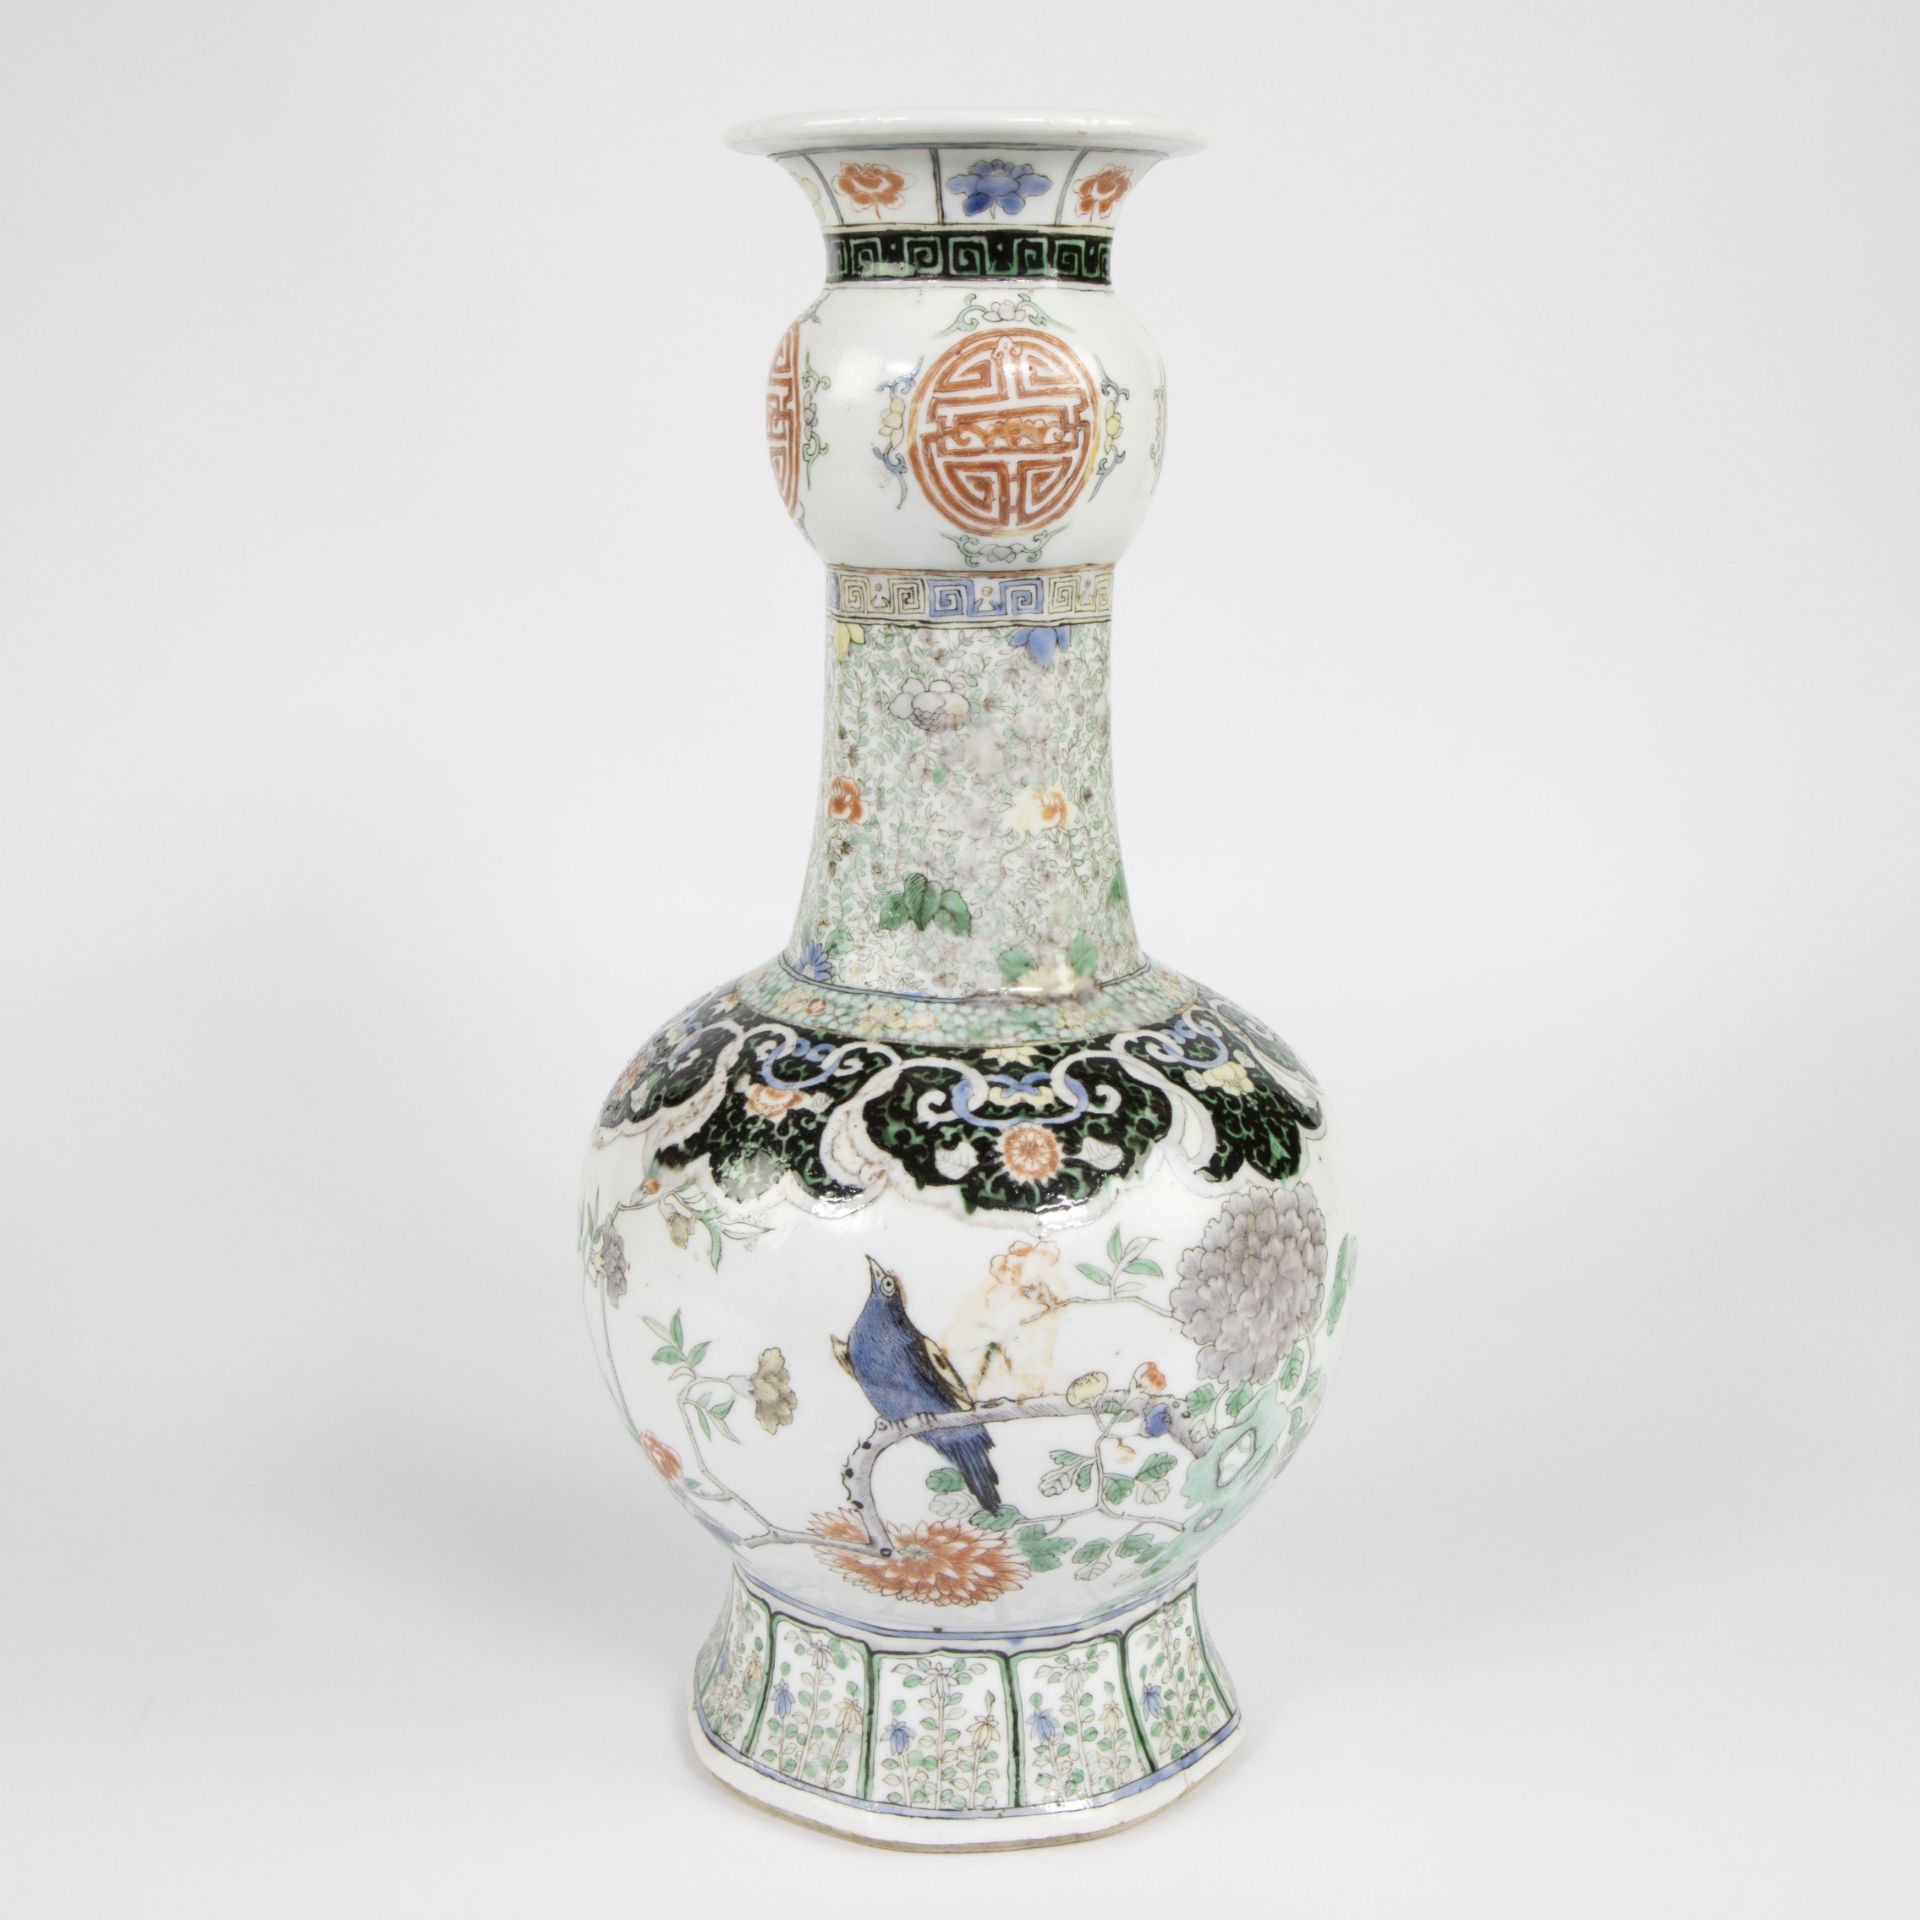 Chinese 'garlic shaped' vase floral decor with birds 19/20th century